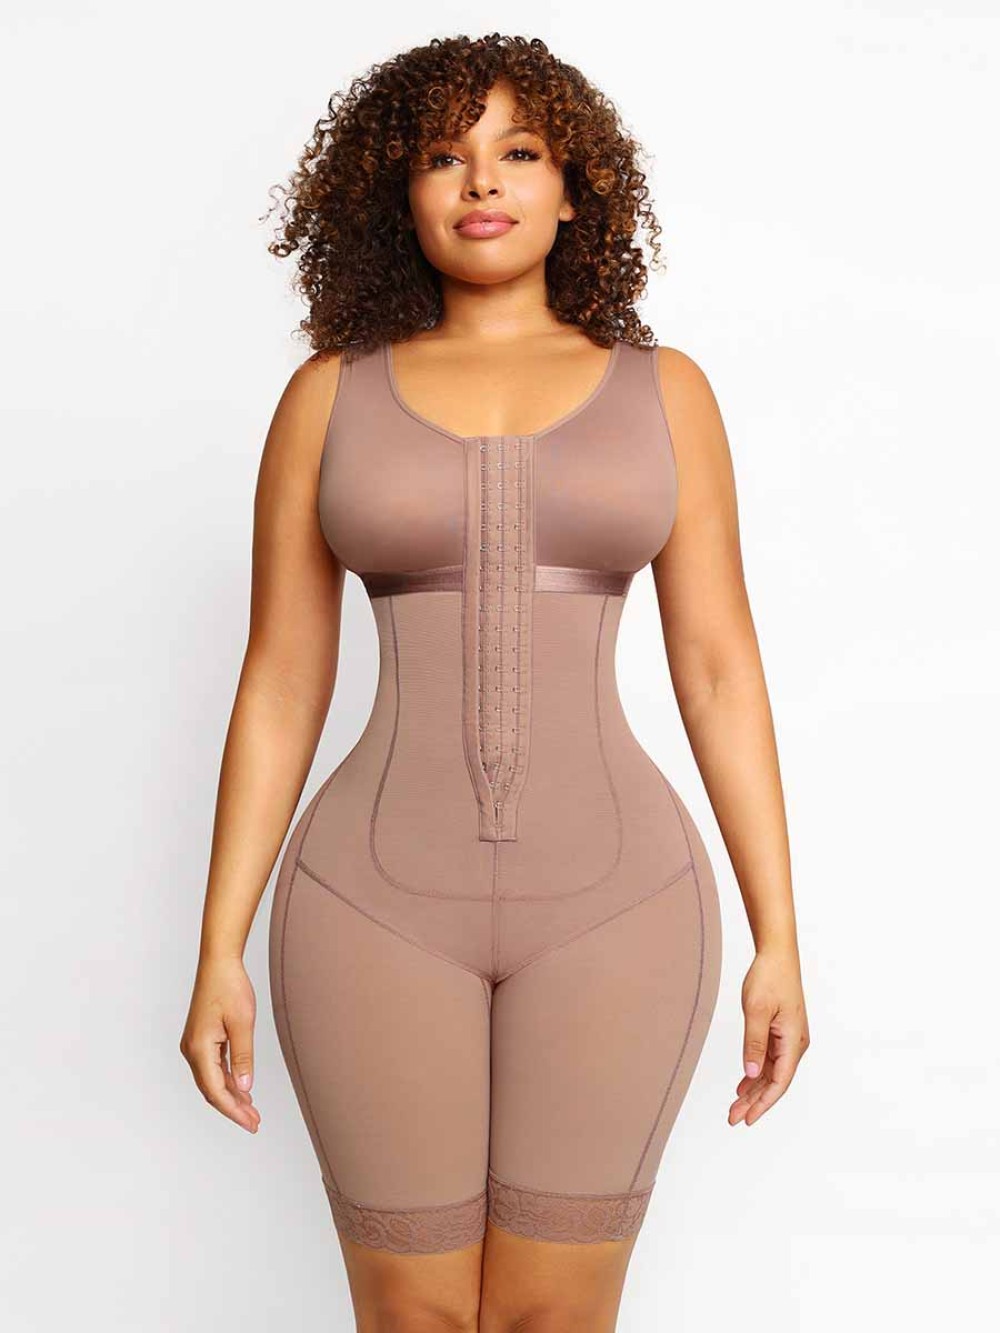 High Quality Full Compression Fajas Colombians Body Shaper